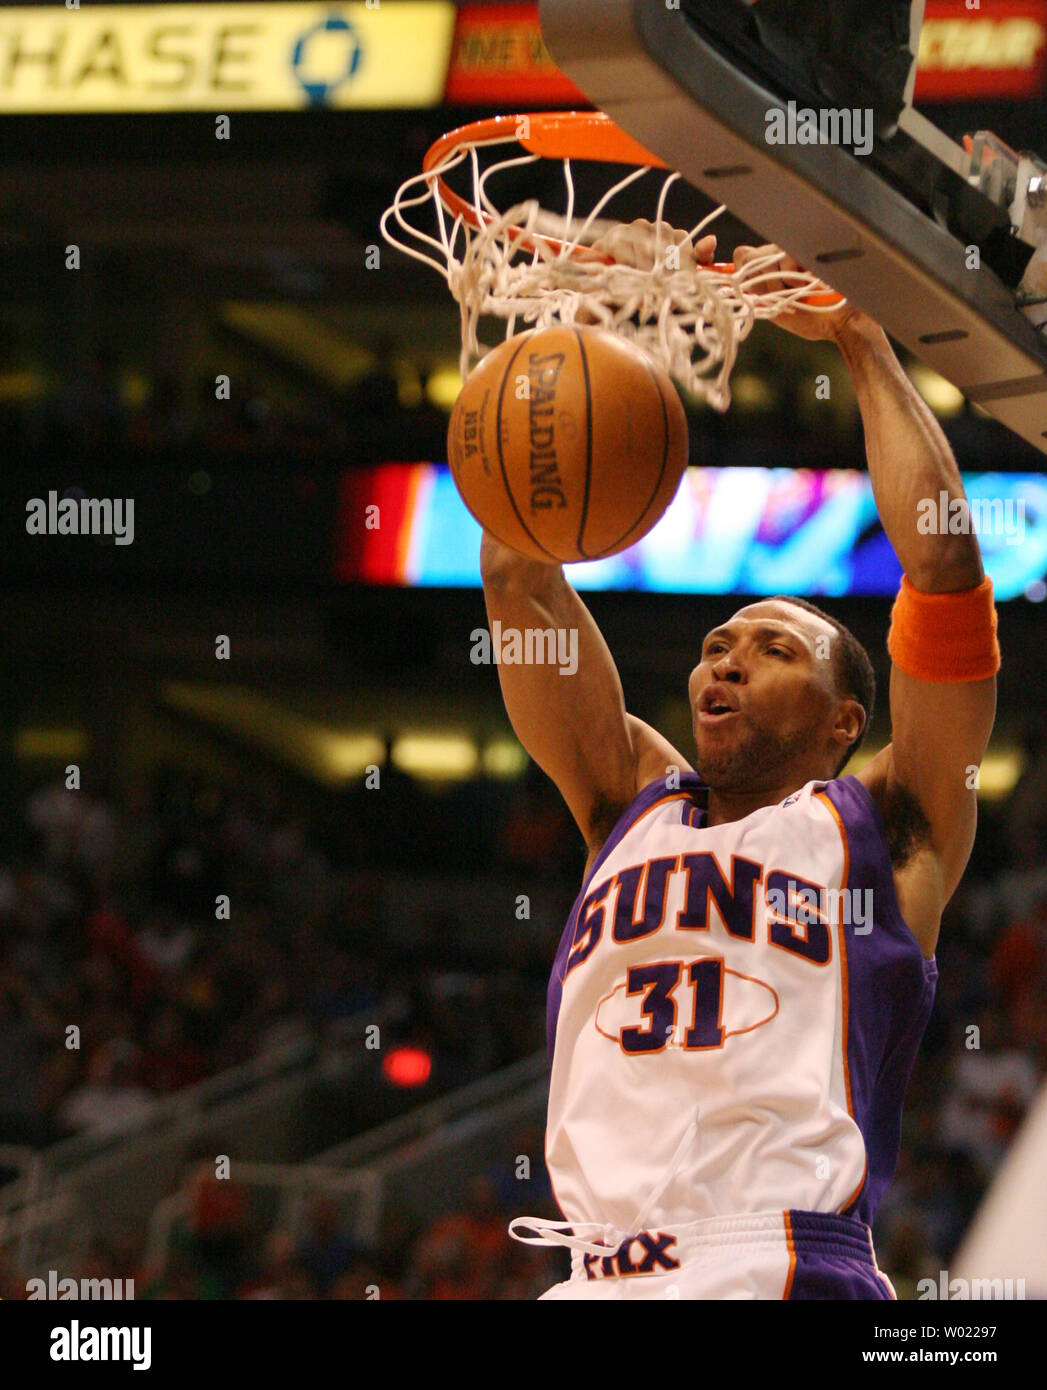 Shawn Marion reflects on time with Phoenix Suns, says 2006 was best shot at  championship